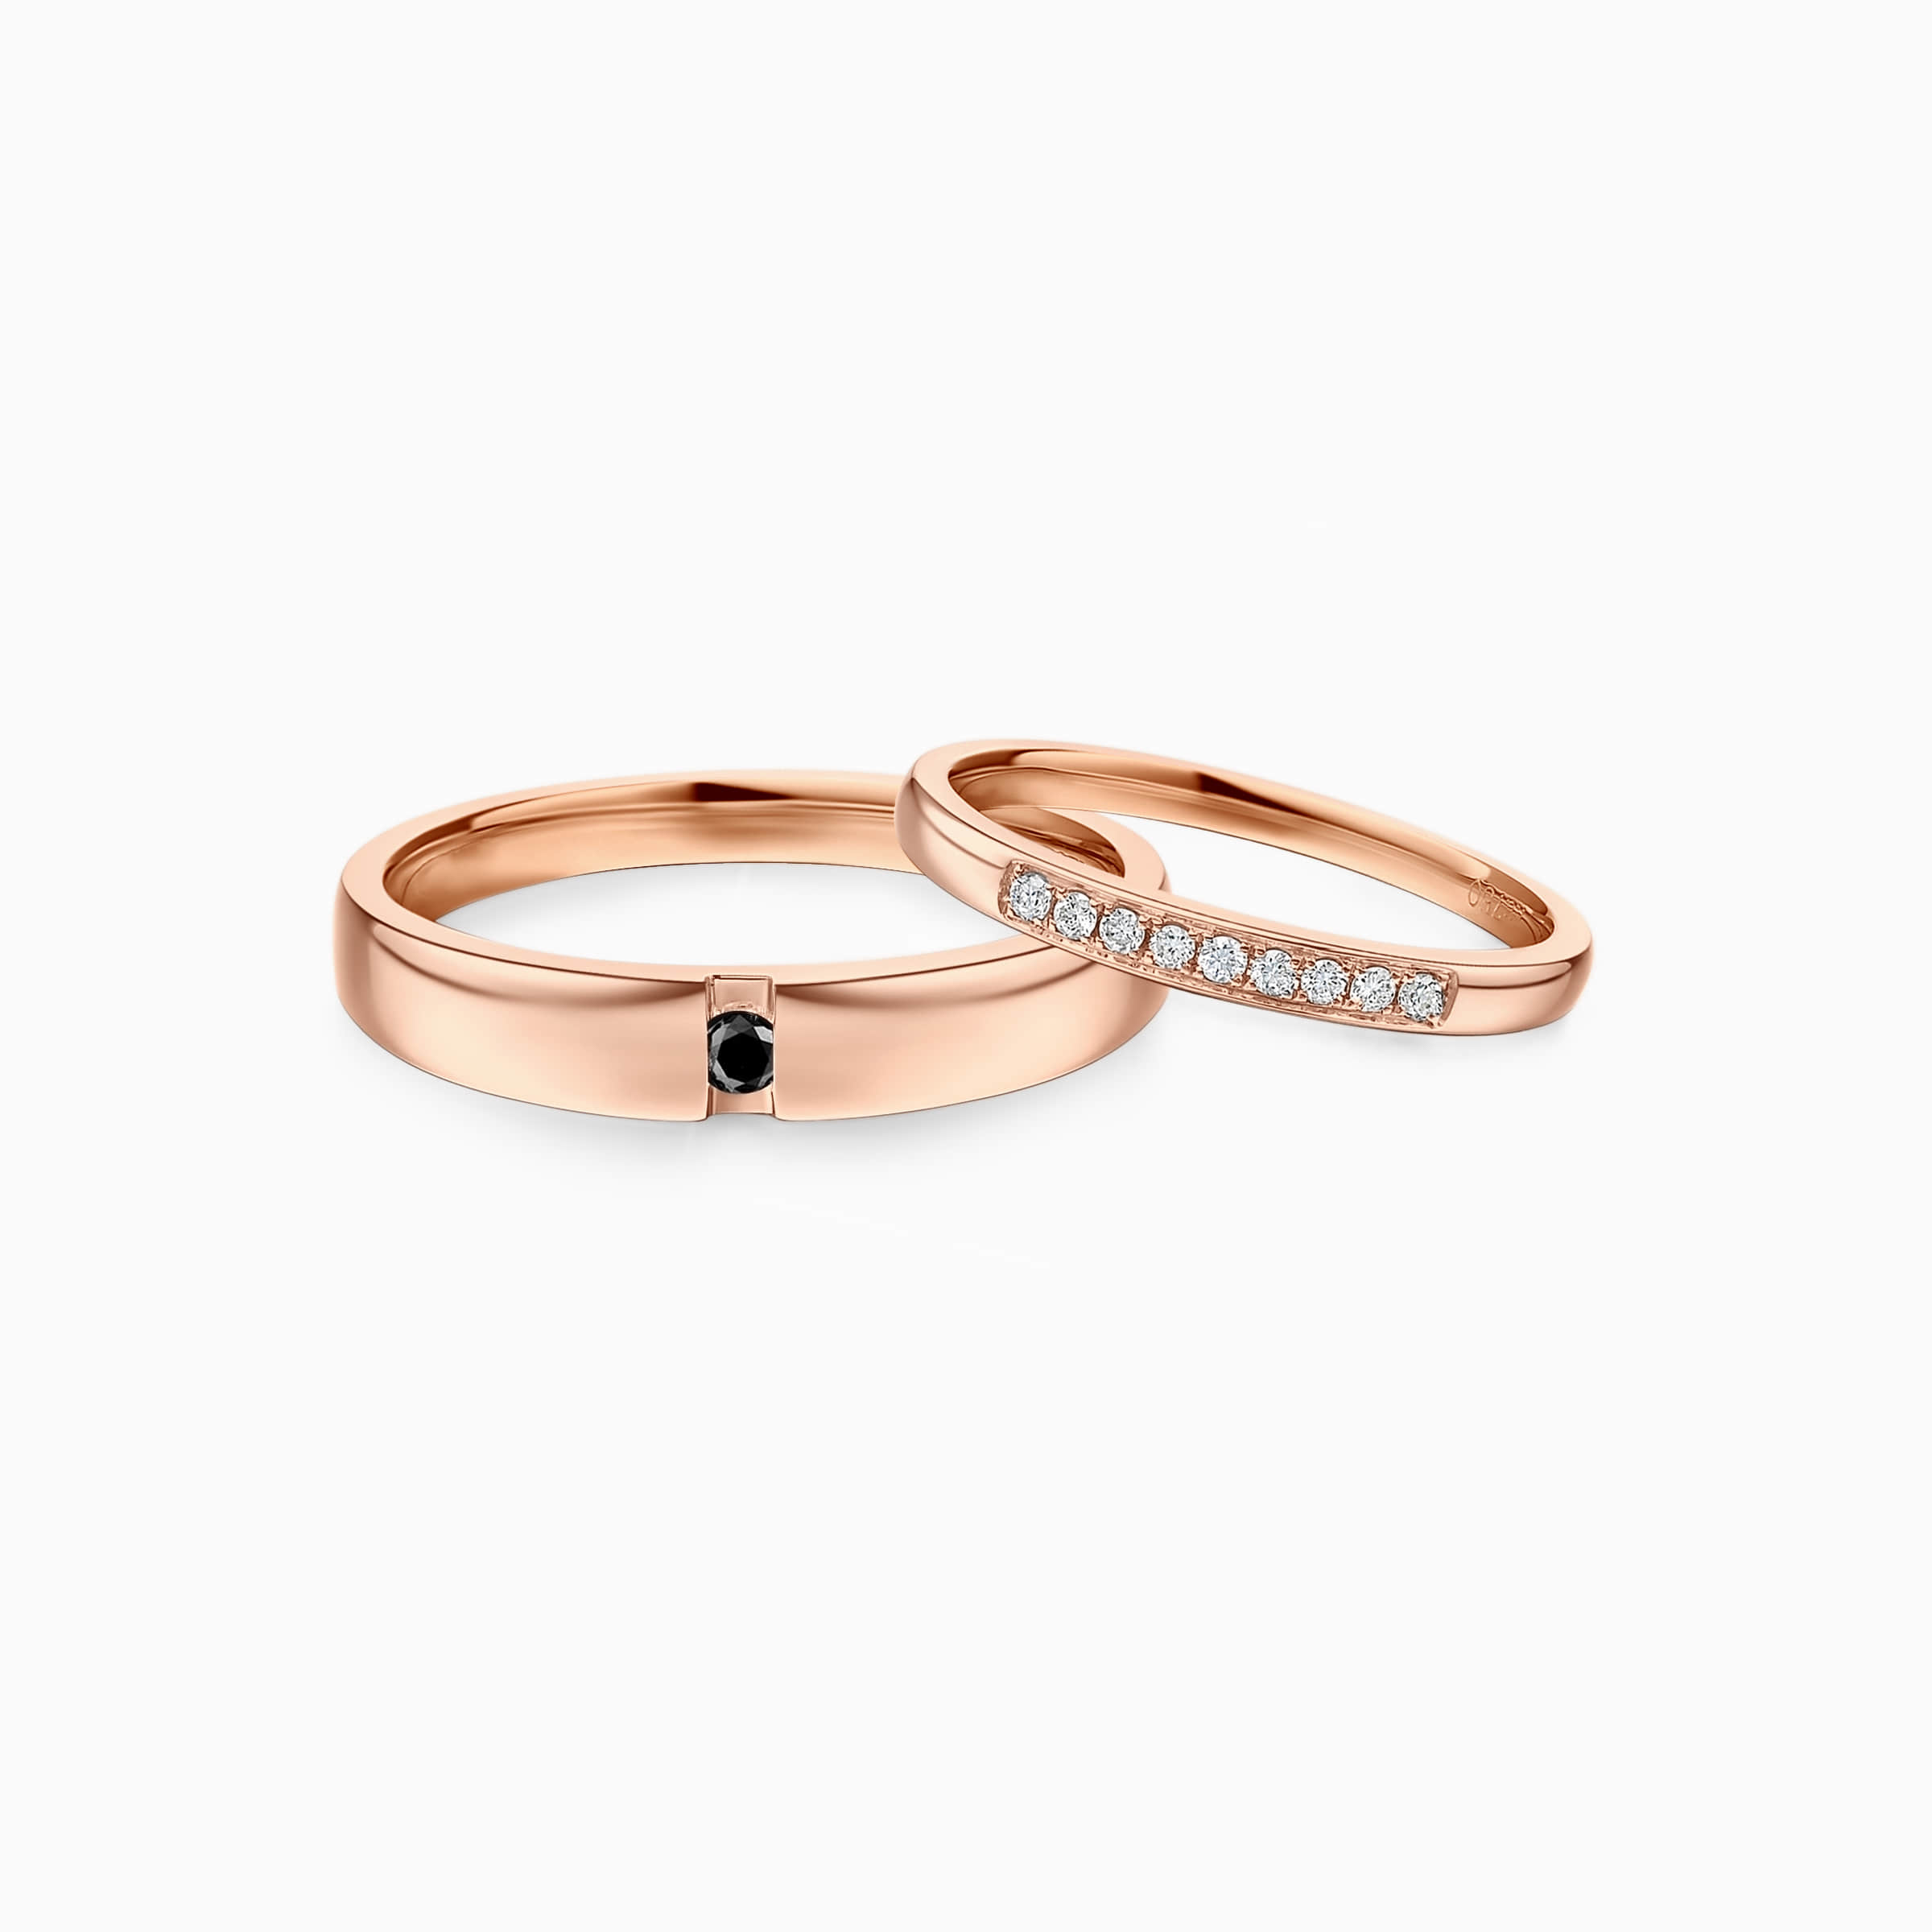 Darry Ring his and hers wedding ring sets in rose gold